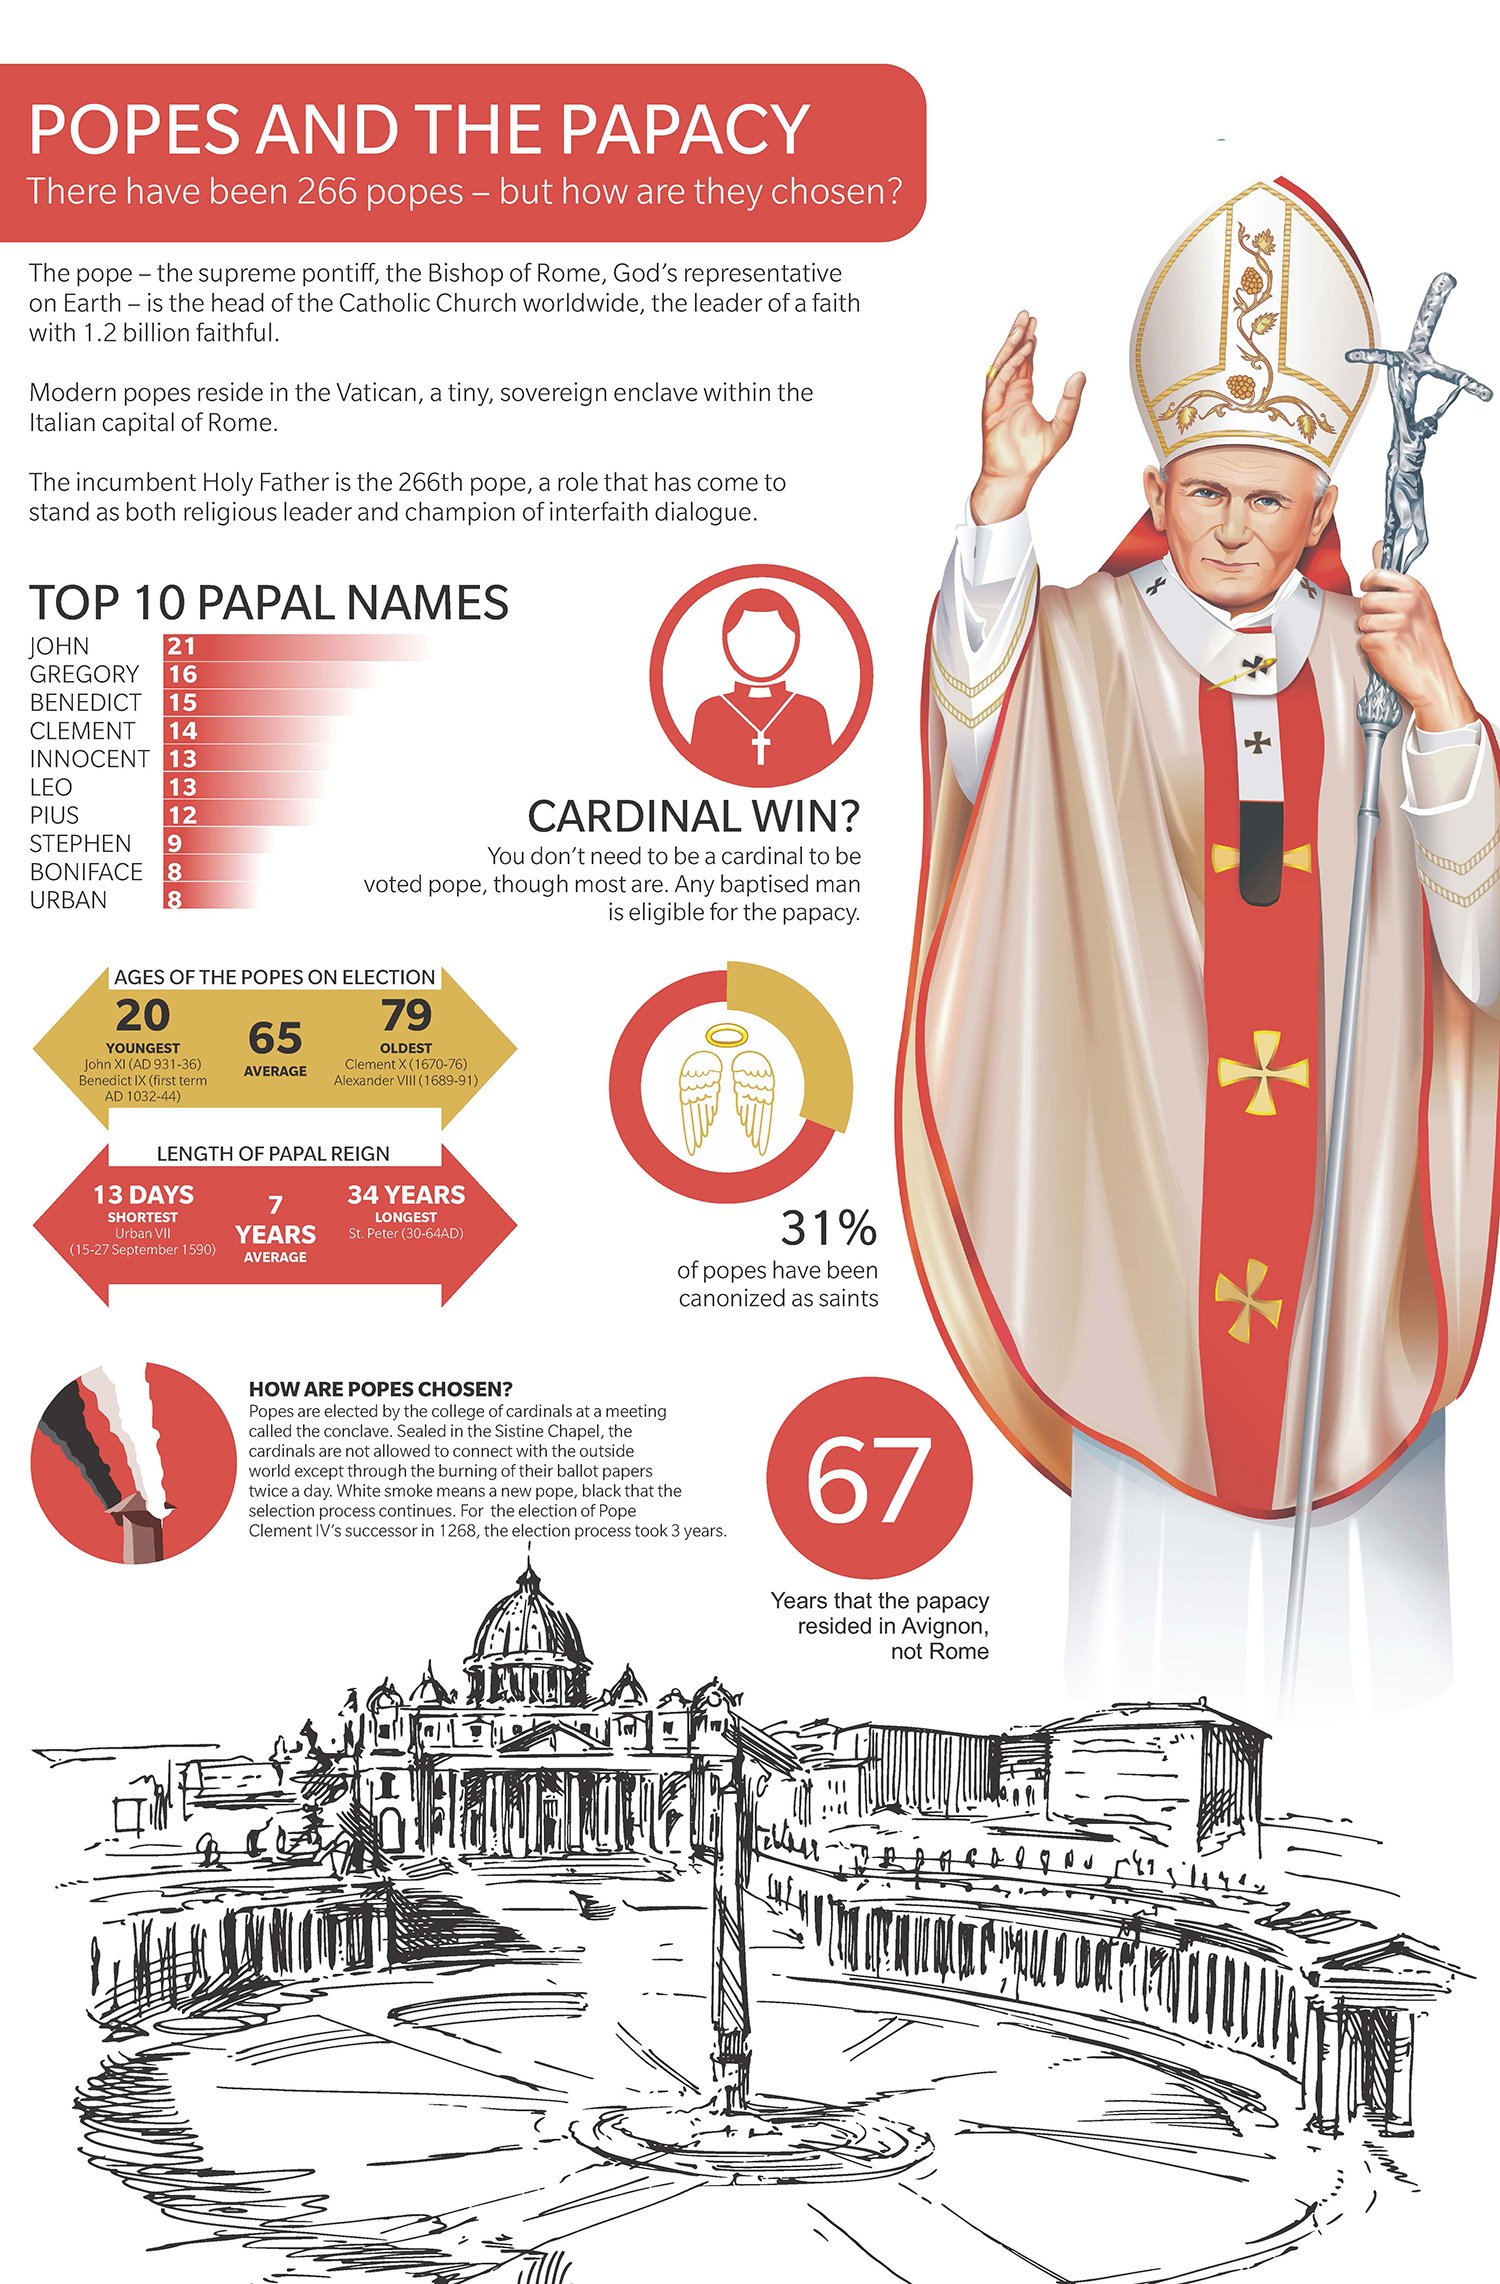 Popes and the Papacy Infographic.jpg